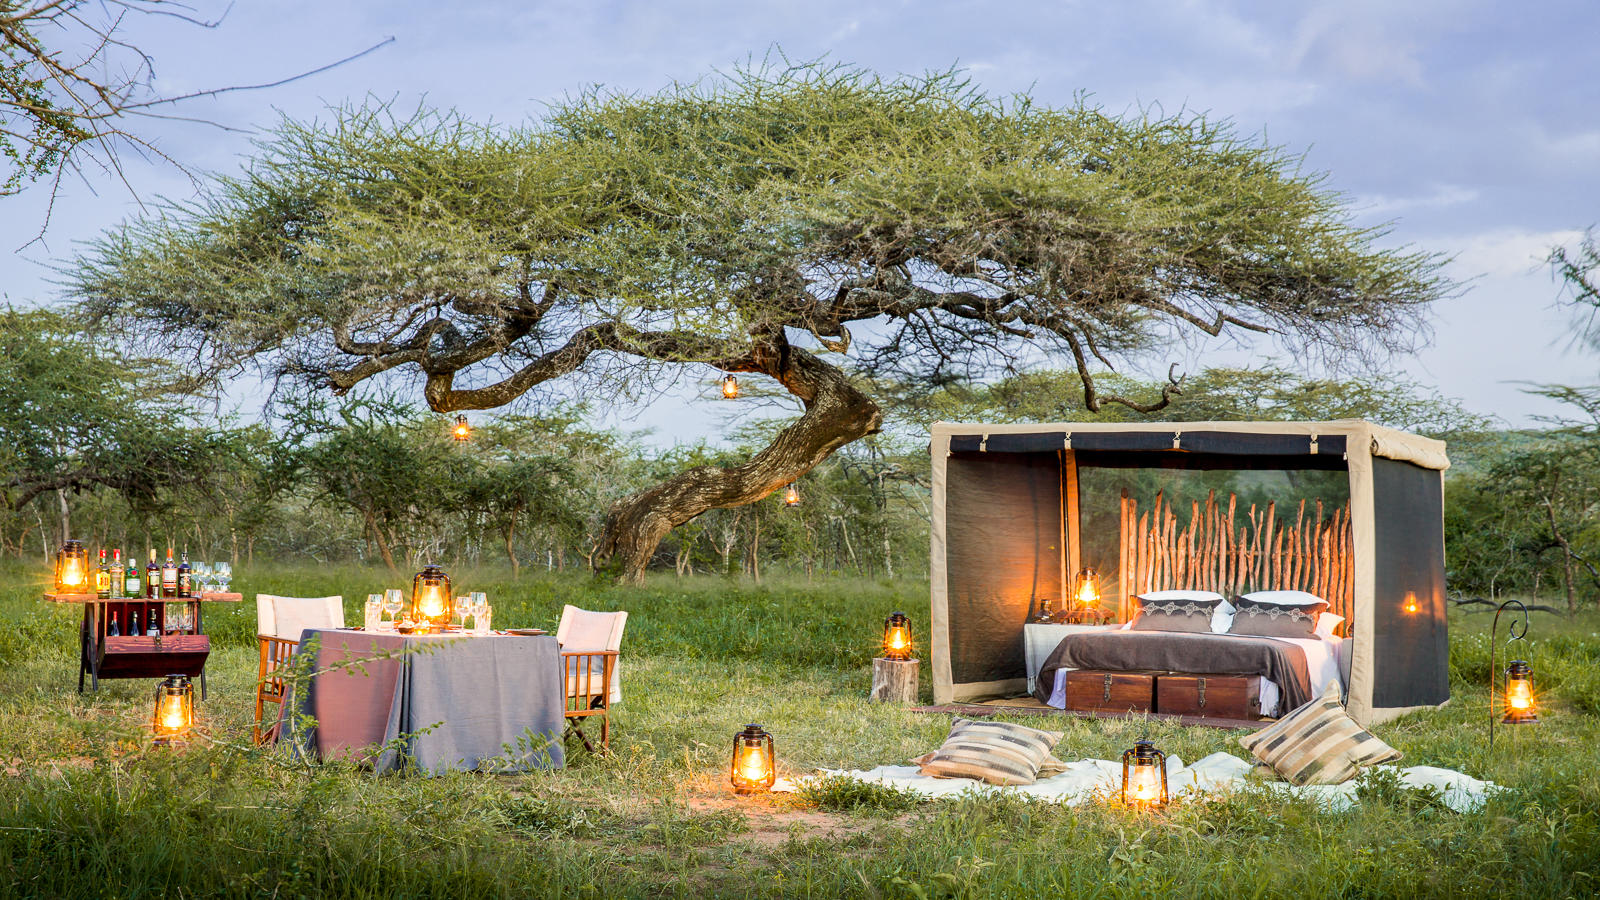 Legendary Expeditions, fly camping experience in the Serengeti National Park, Tanzania